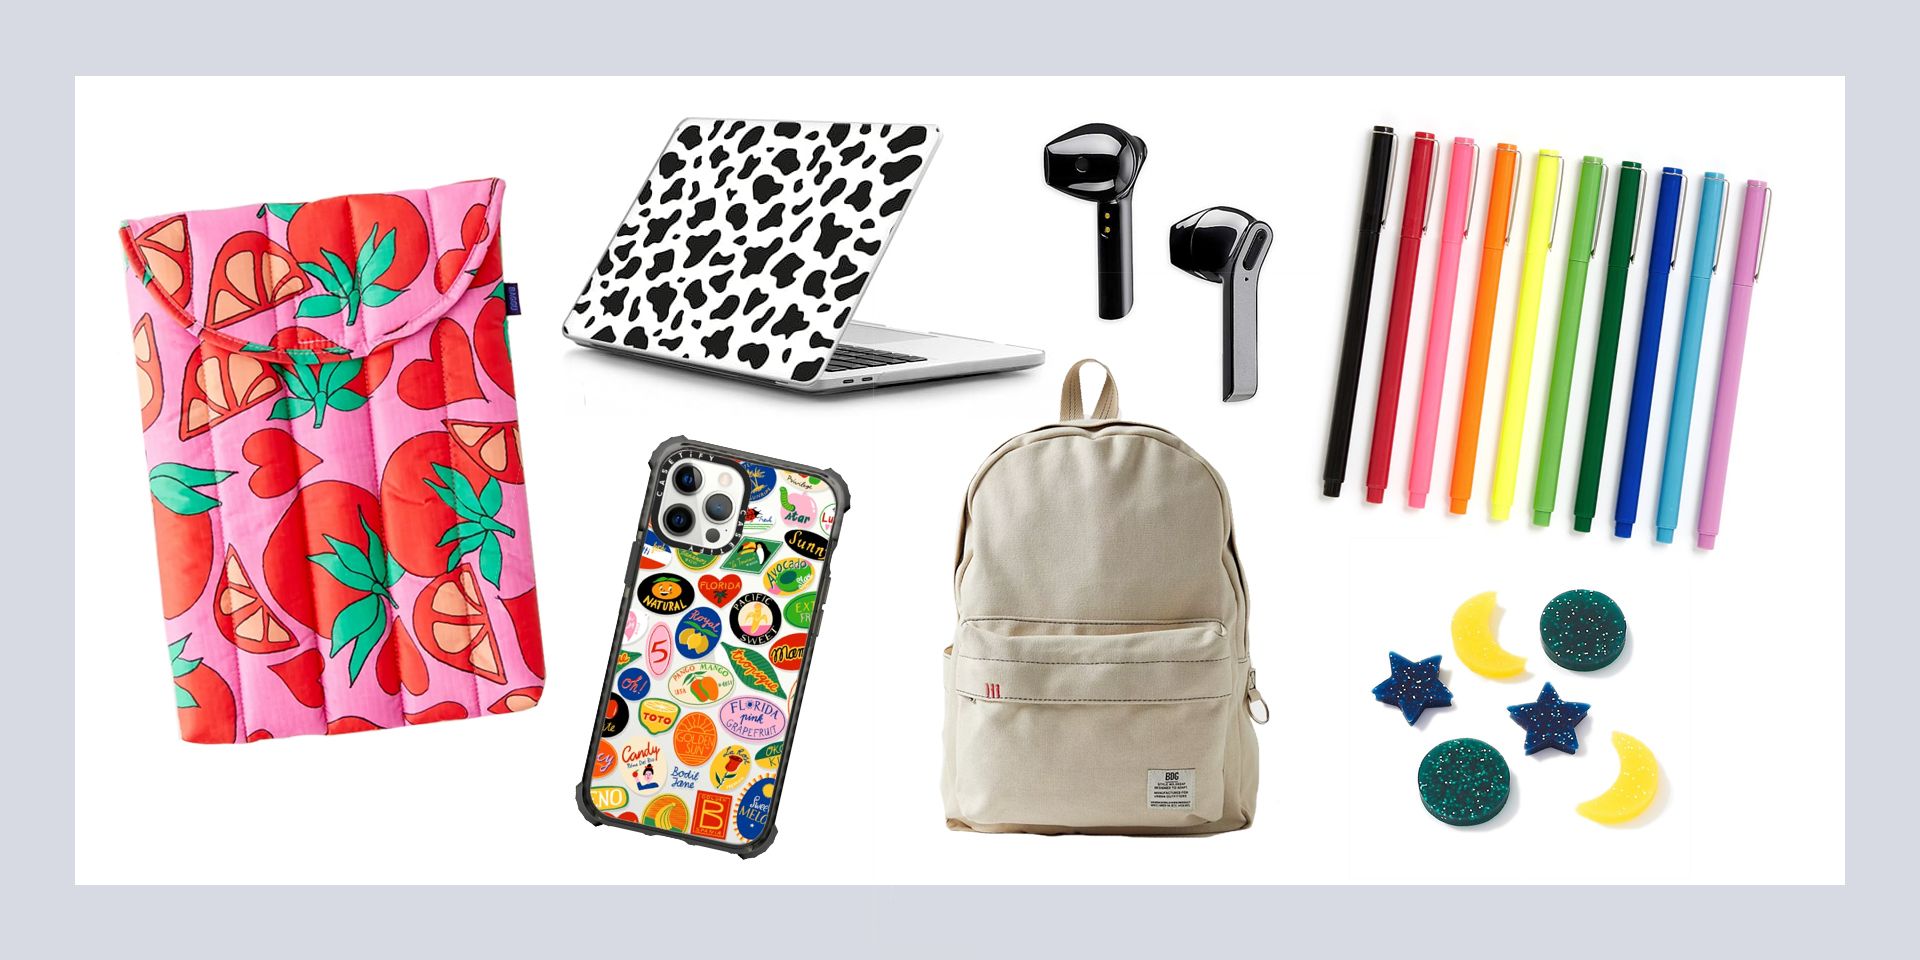 Our Ultimate Back to School Essentials